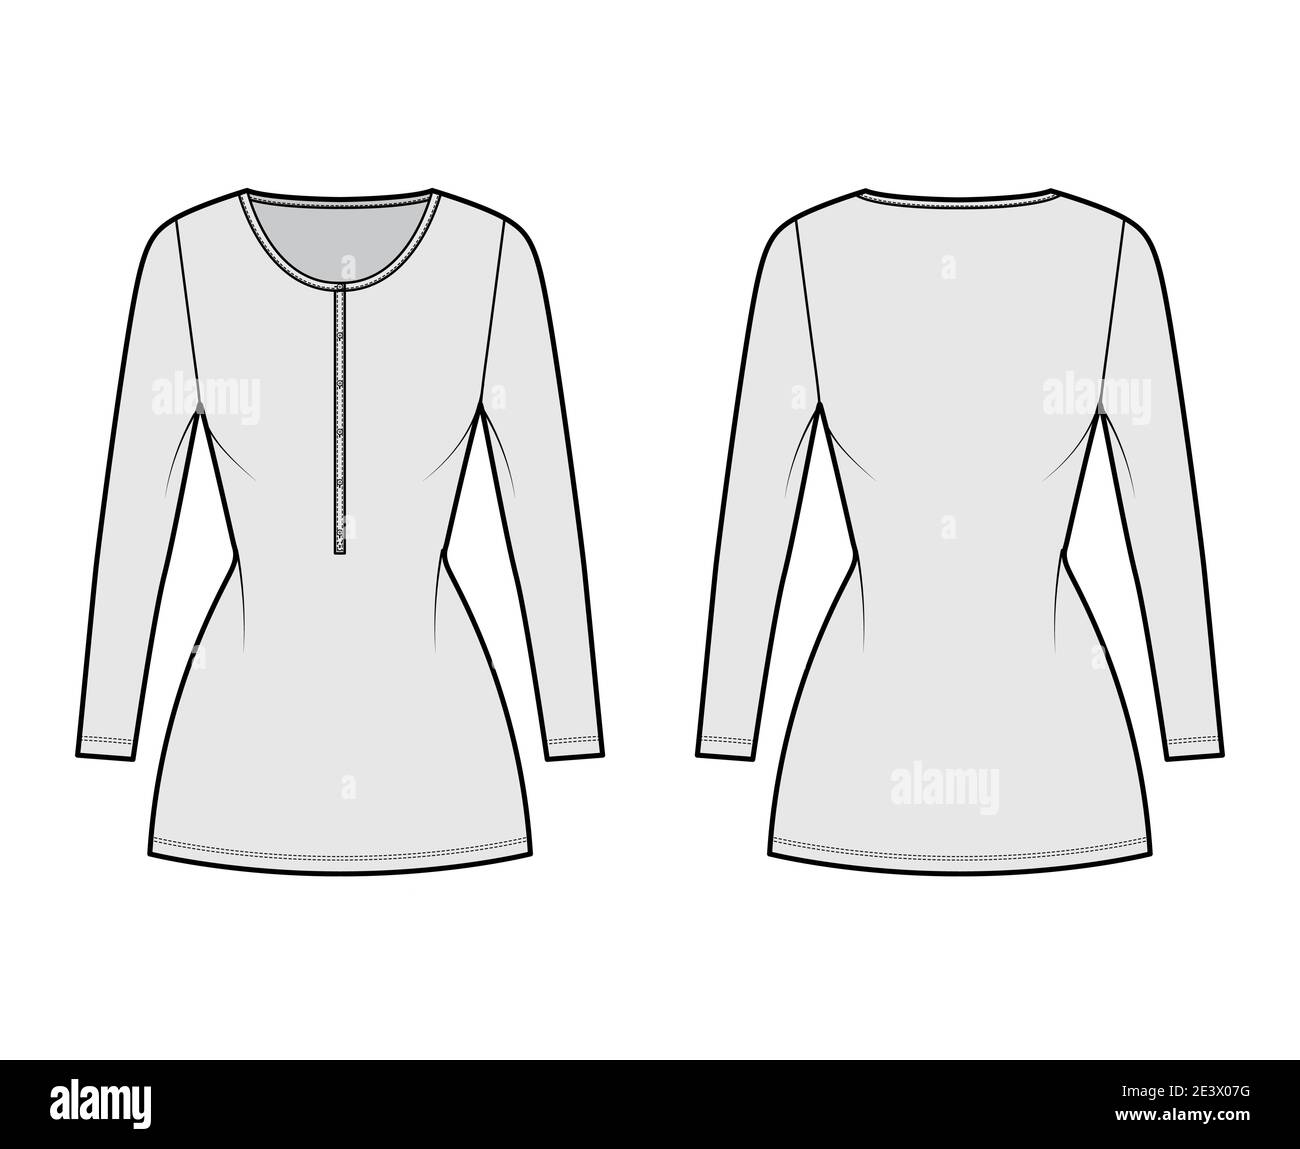 Shirt dress mini technical fashion illustration with henley neck, long sleeves, fitted body, Pencil fullness, stretch jersey. Flat apparel template front, back grey color. Women, men unisex CAD mockup Stock Vector